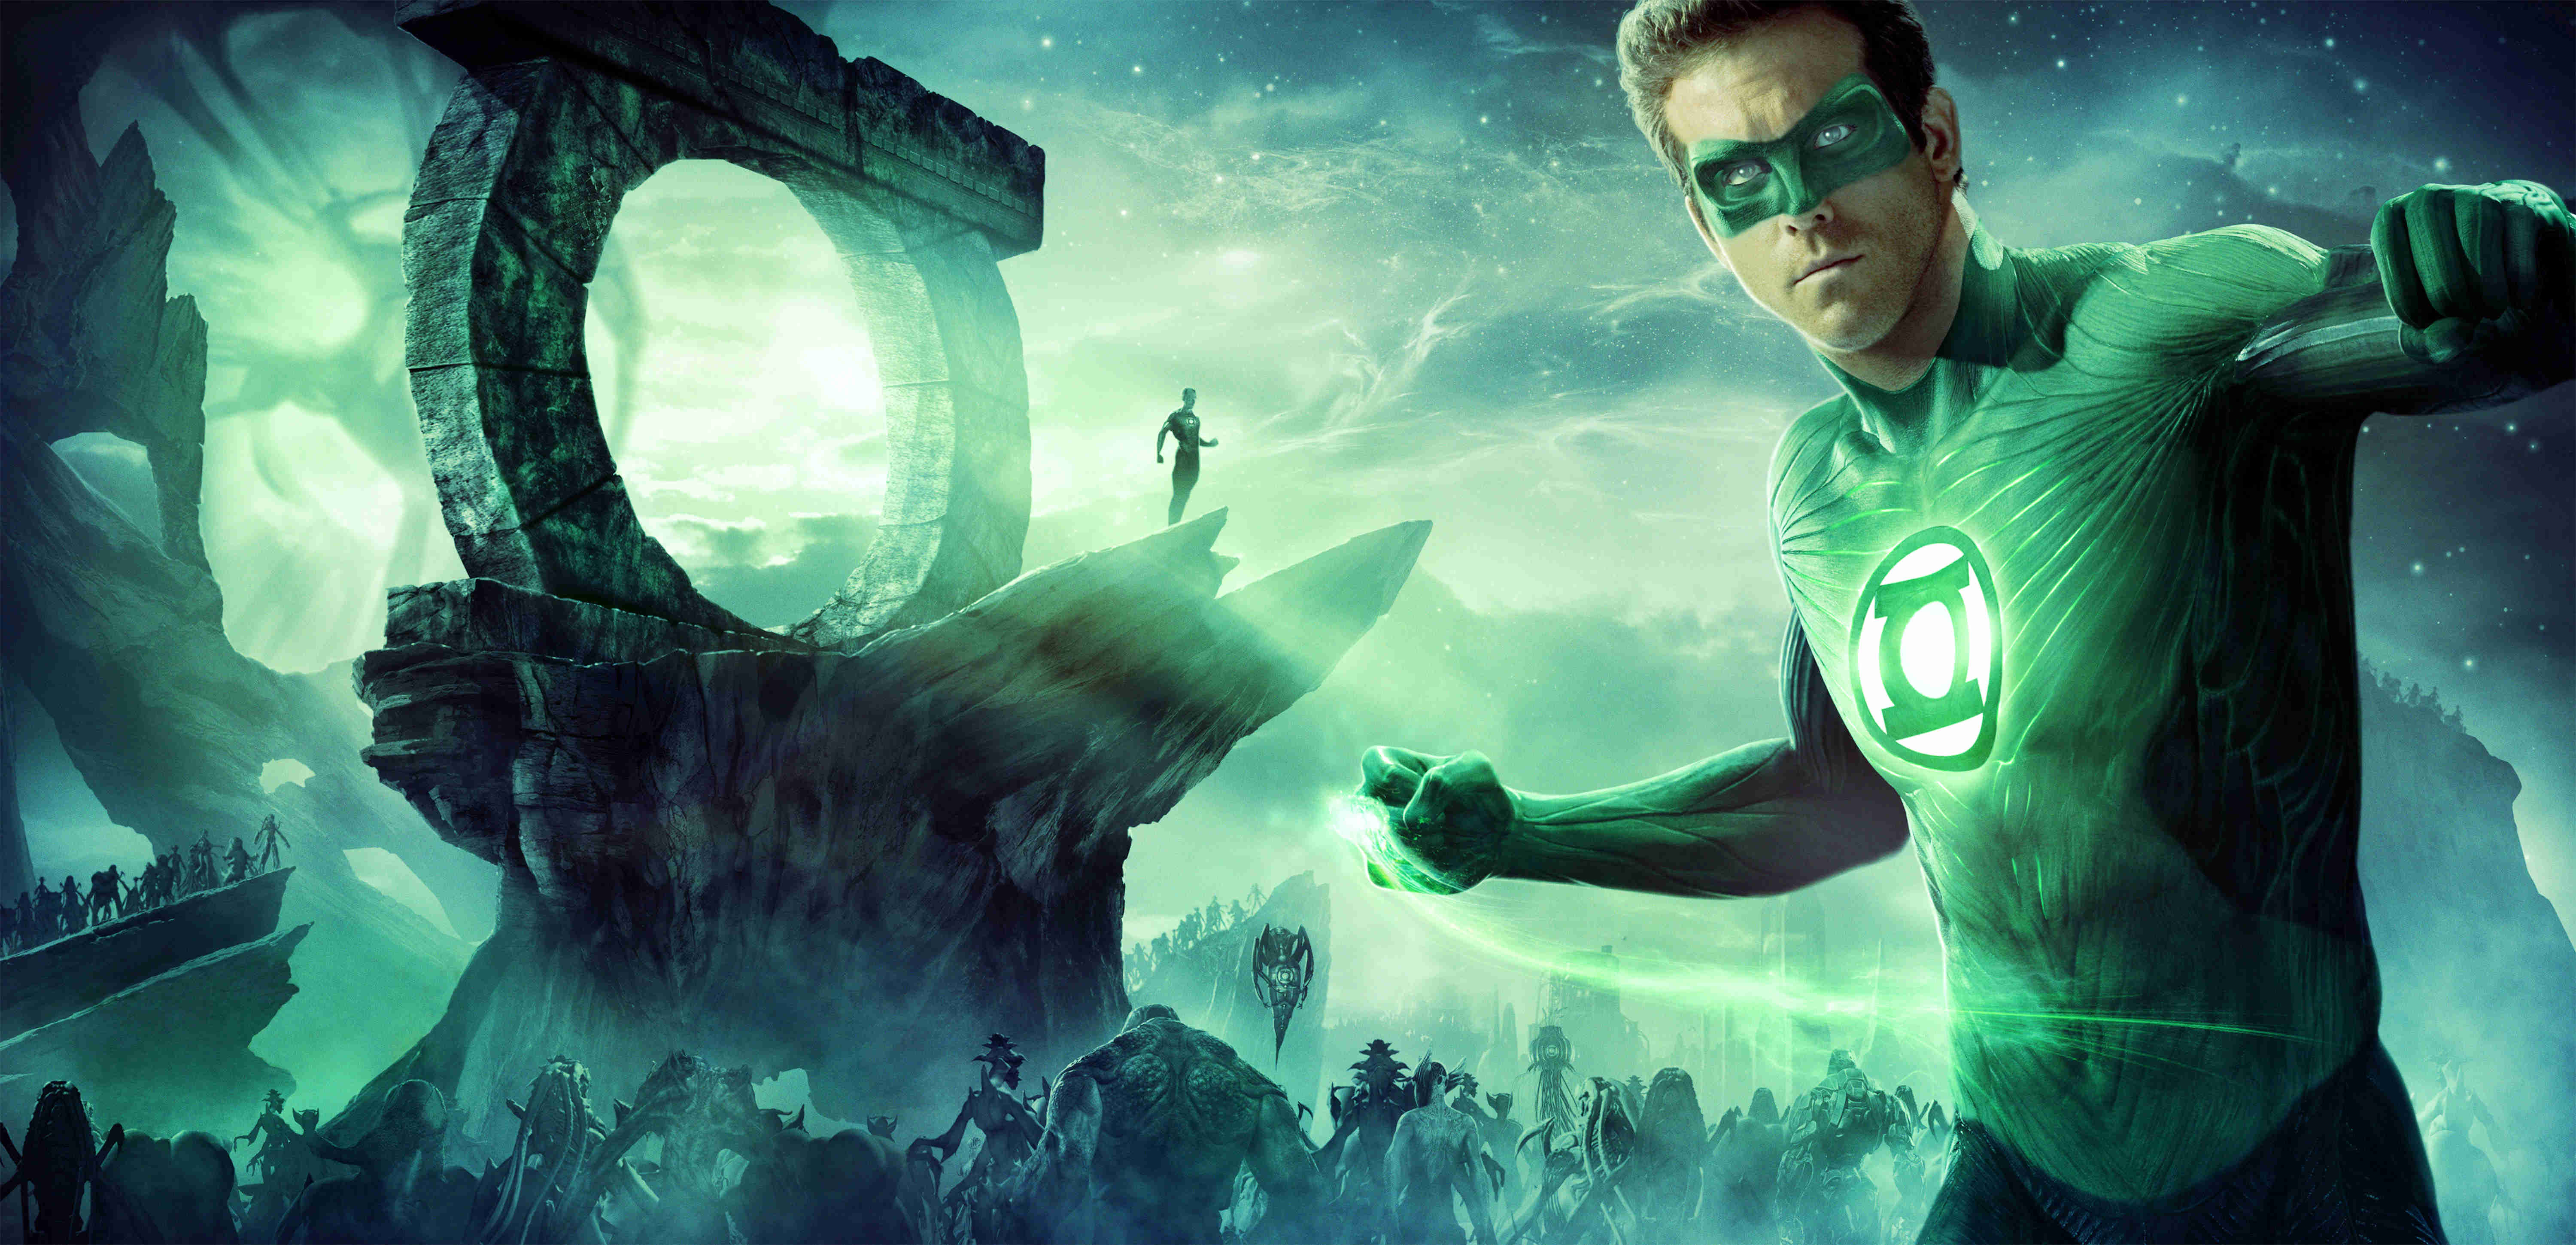 Review: Green Lantern. I Am Your Target Demographic